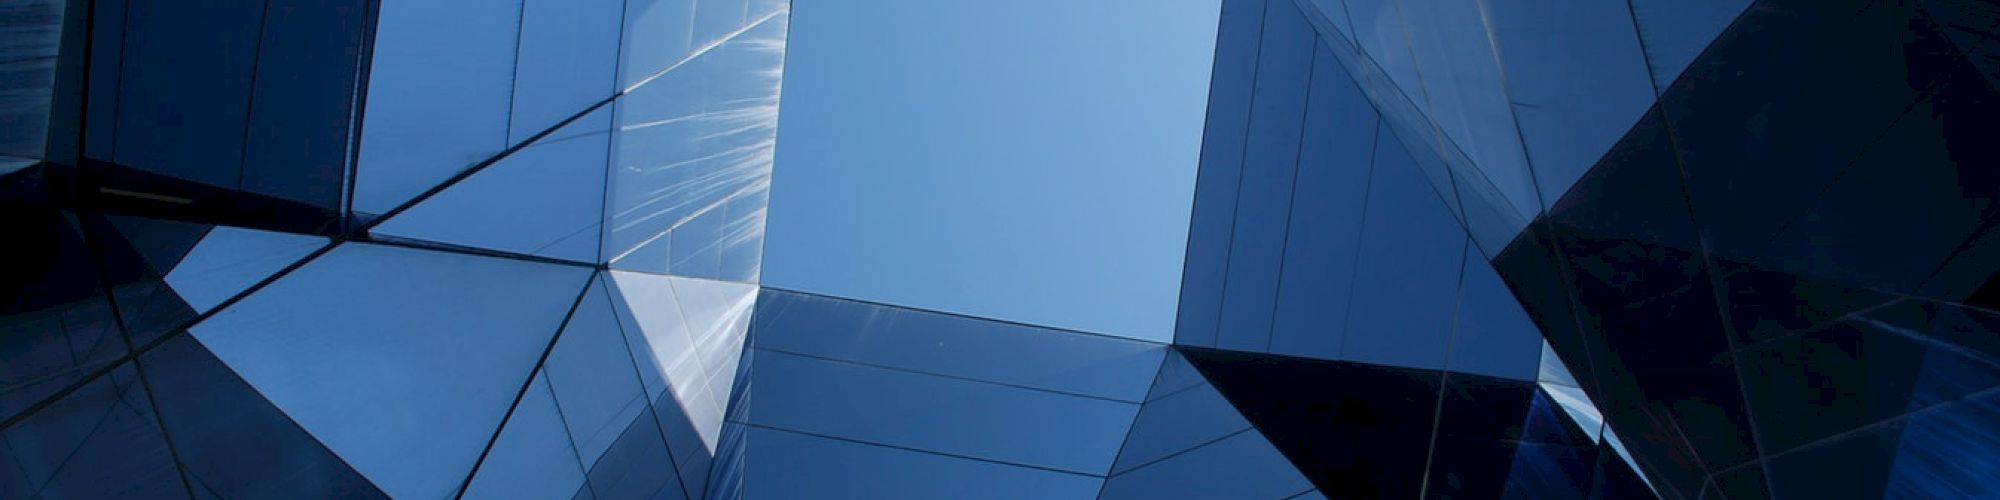 The image shows a geometric architectural structure with reflective glass panels framing a view of the sky, creating a complex and abstract visual.